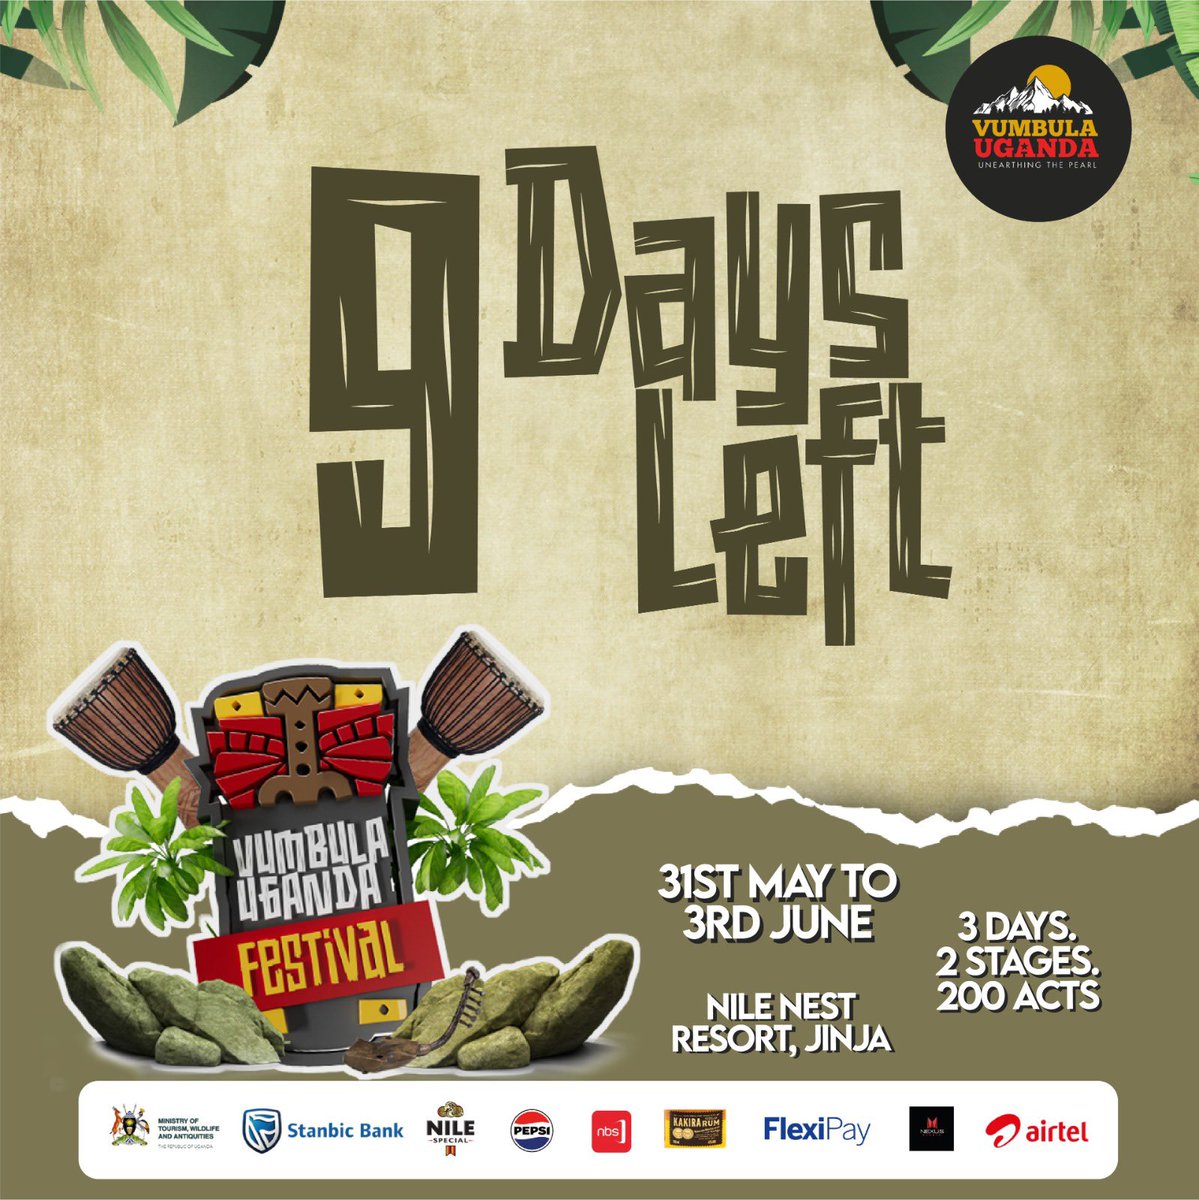 Have you got your #VumbulaUgandaFestival ticket yet? 

With just 9 days left until the biggest tourism festival, don't miss out! Purchase your tickets now on FlexiPay.

#GreeningTheNile